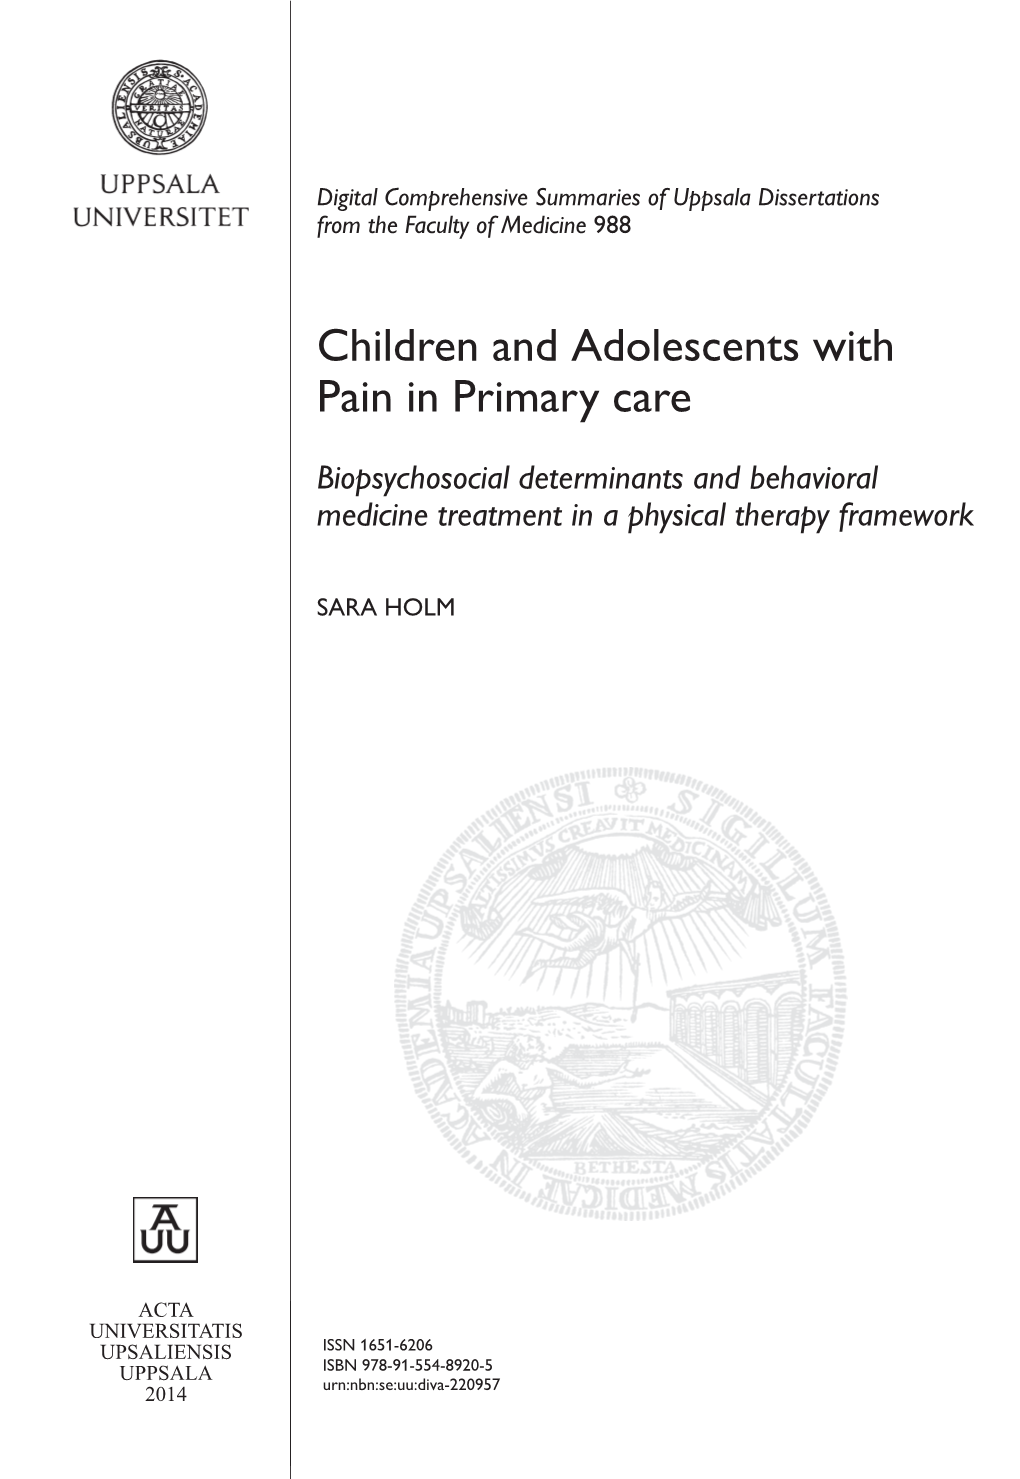 Children and Adolescents with Pain in Primary Care